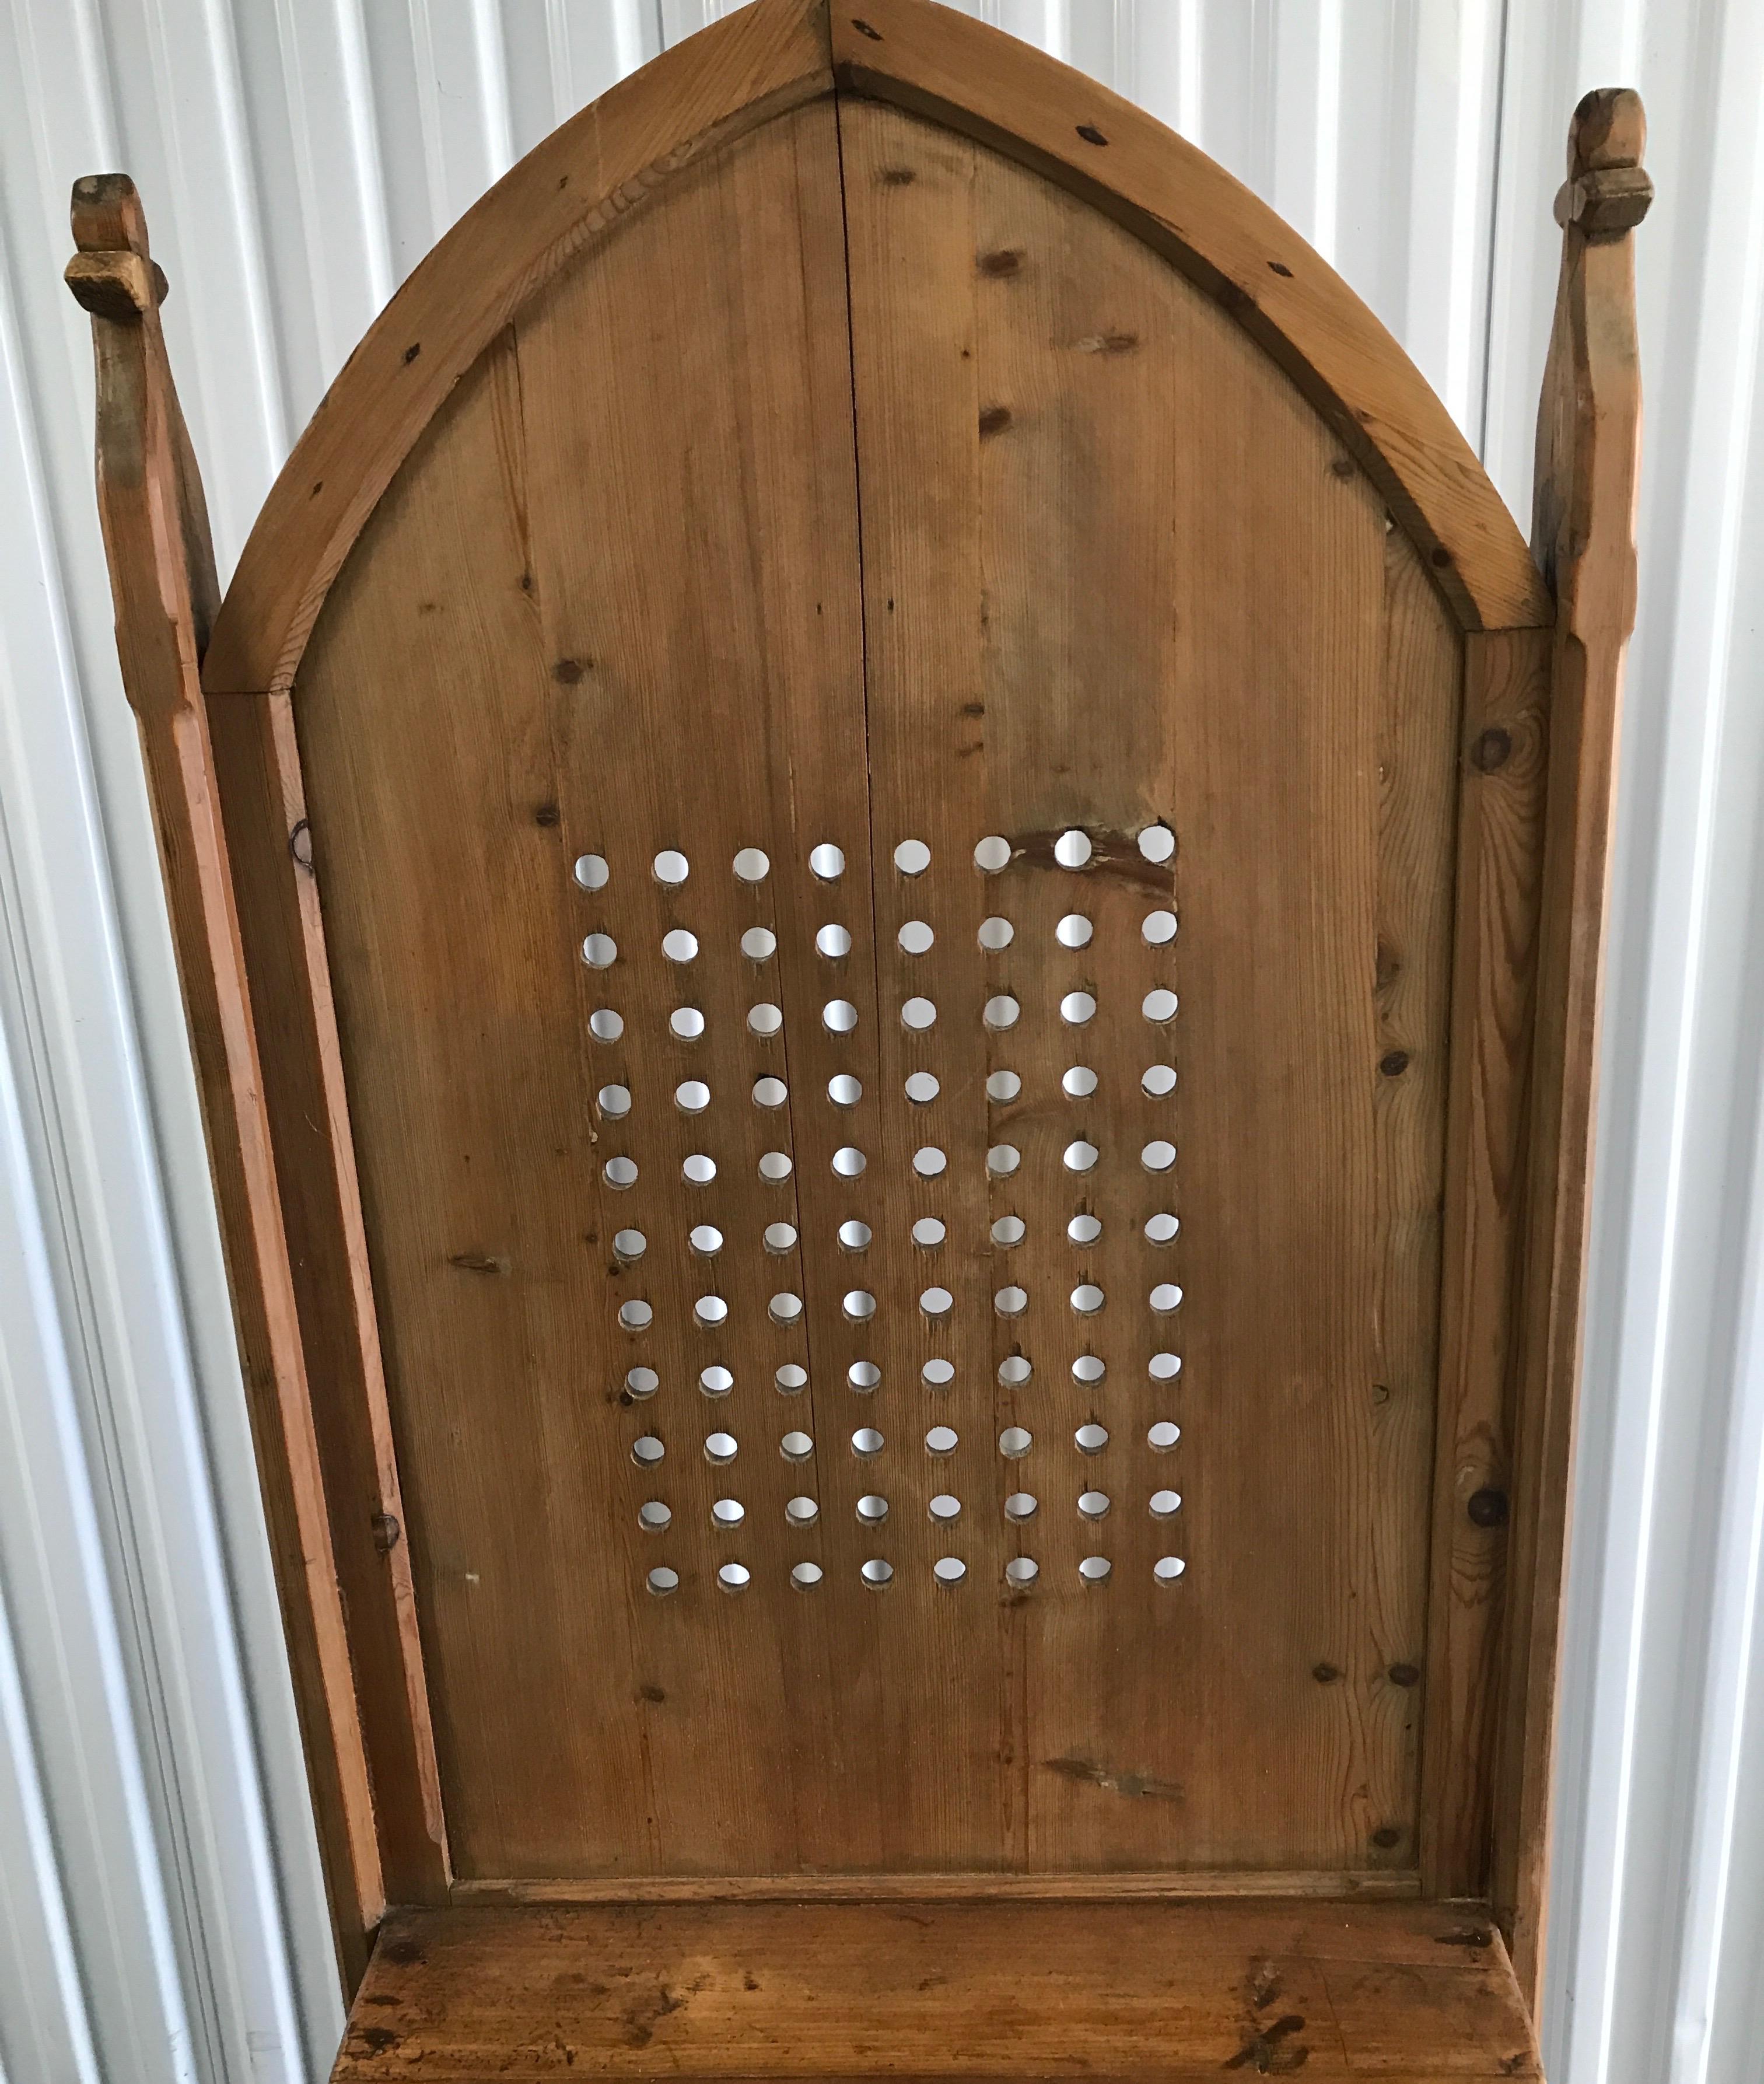 Antique French confessional with arched top and fleur-de-lis on each side. Would make a unique screen/divider.